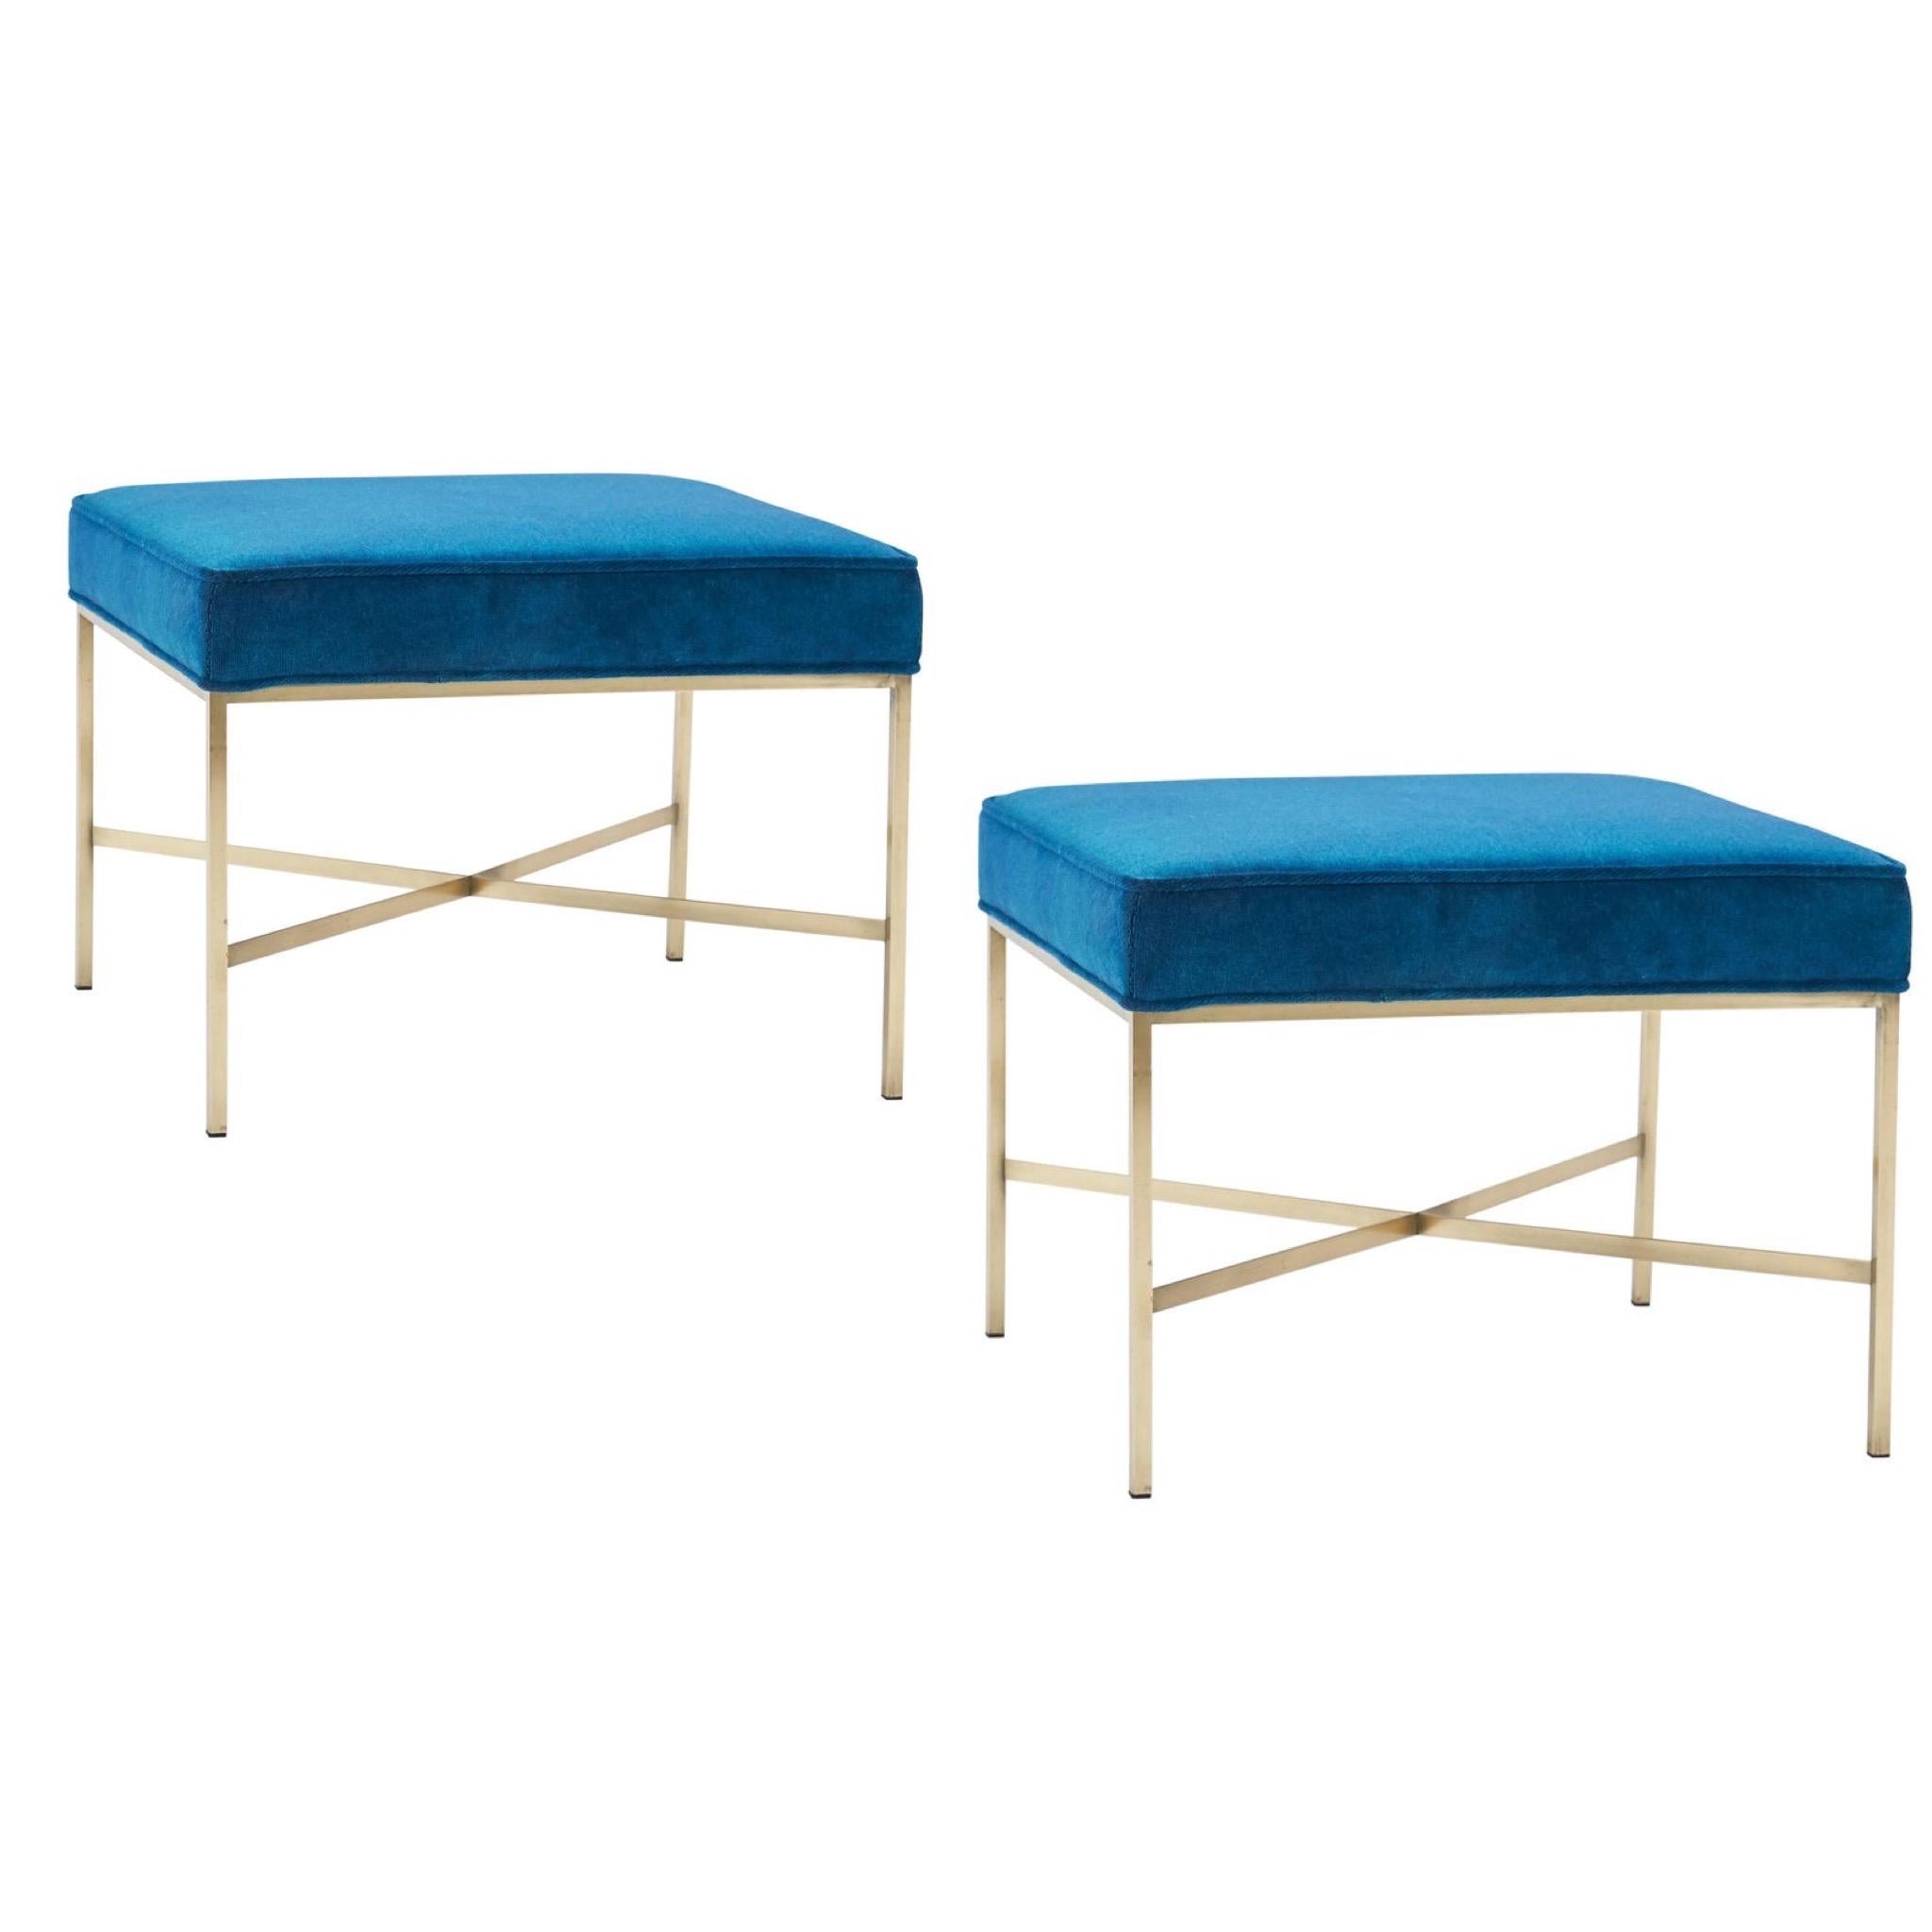 Pair of brass X-base stools by Paul McCobb for Calvin Furniture. New cushions covered in new velvet, over polished brass bases.